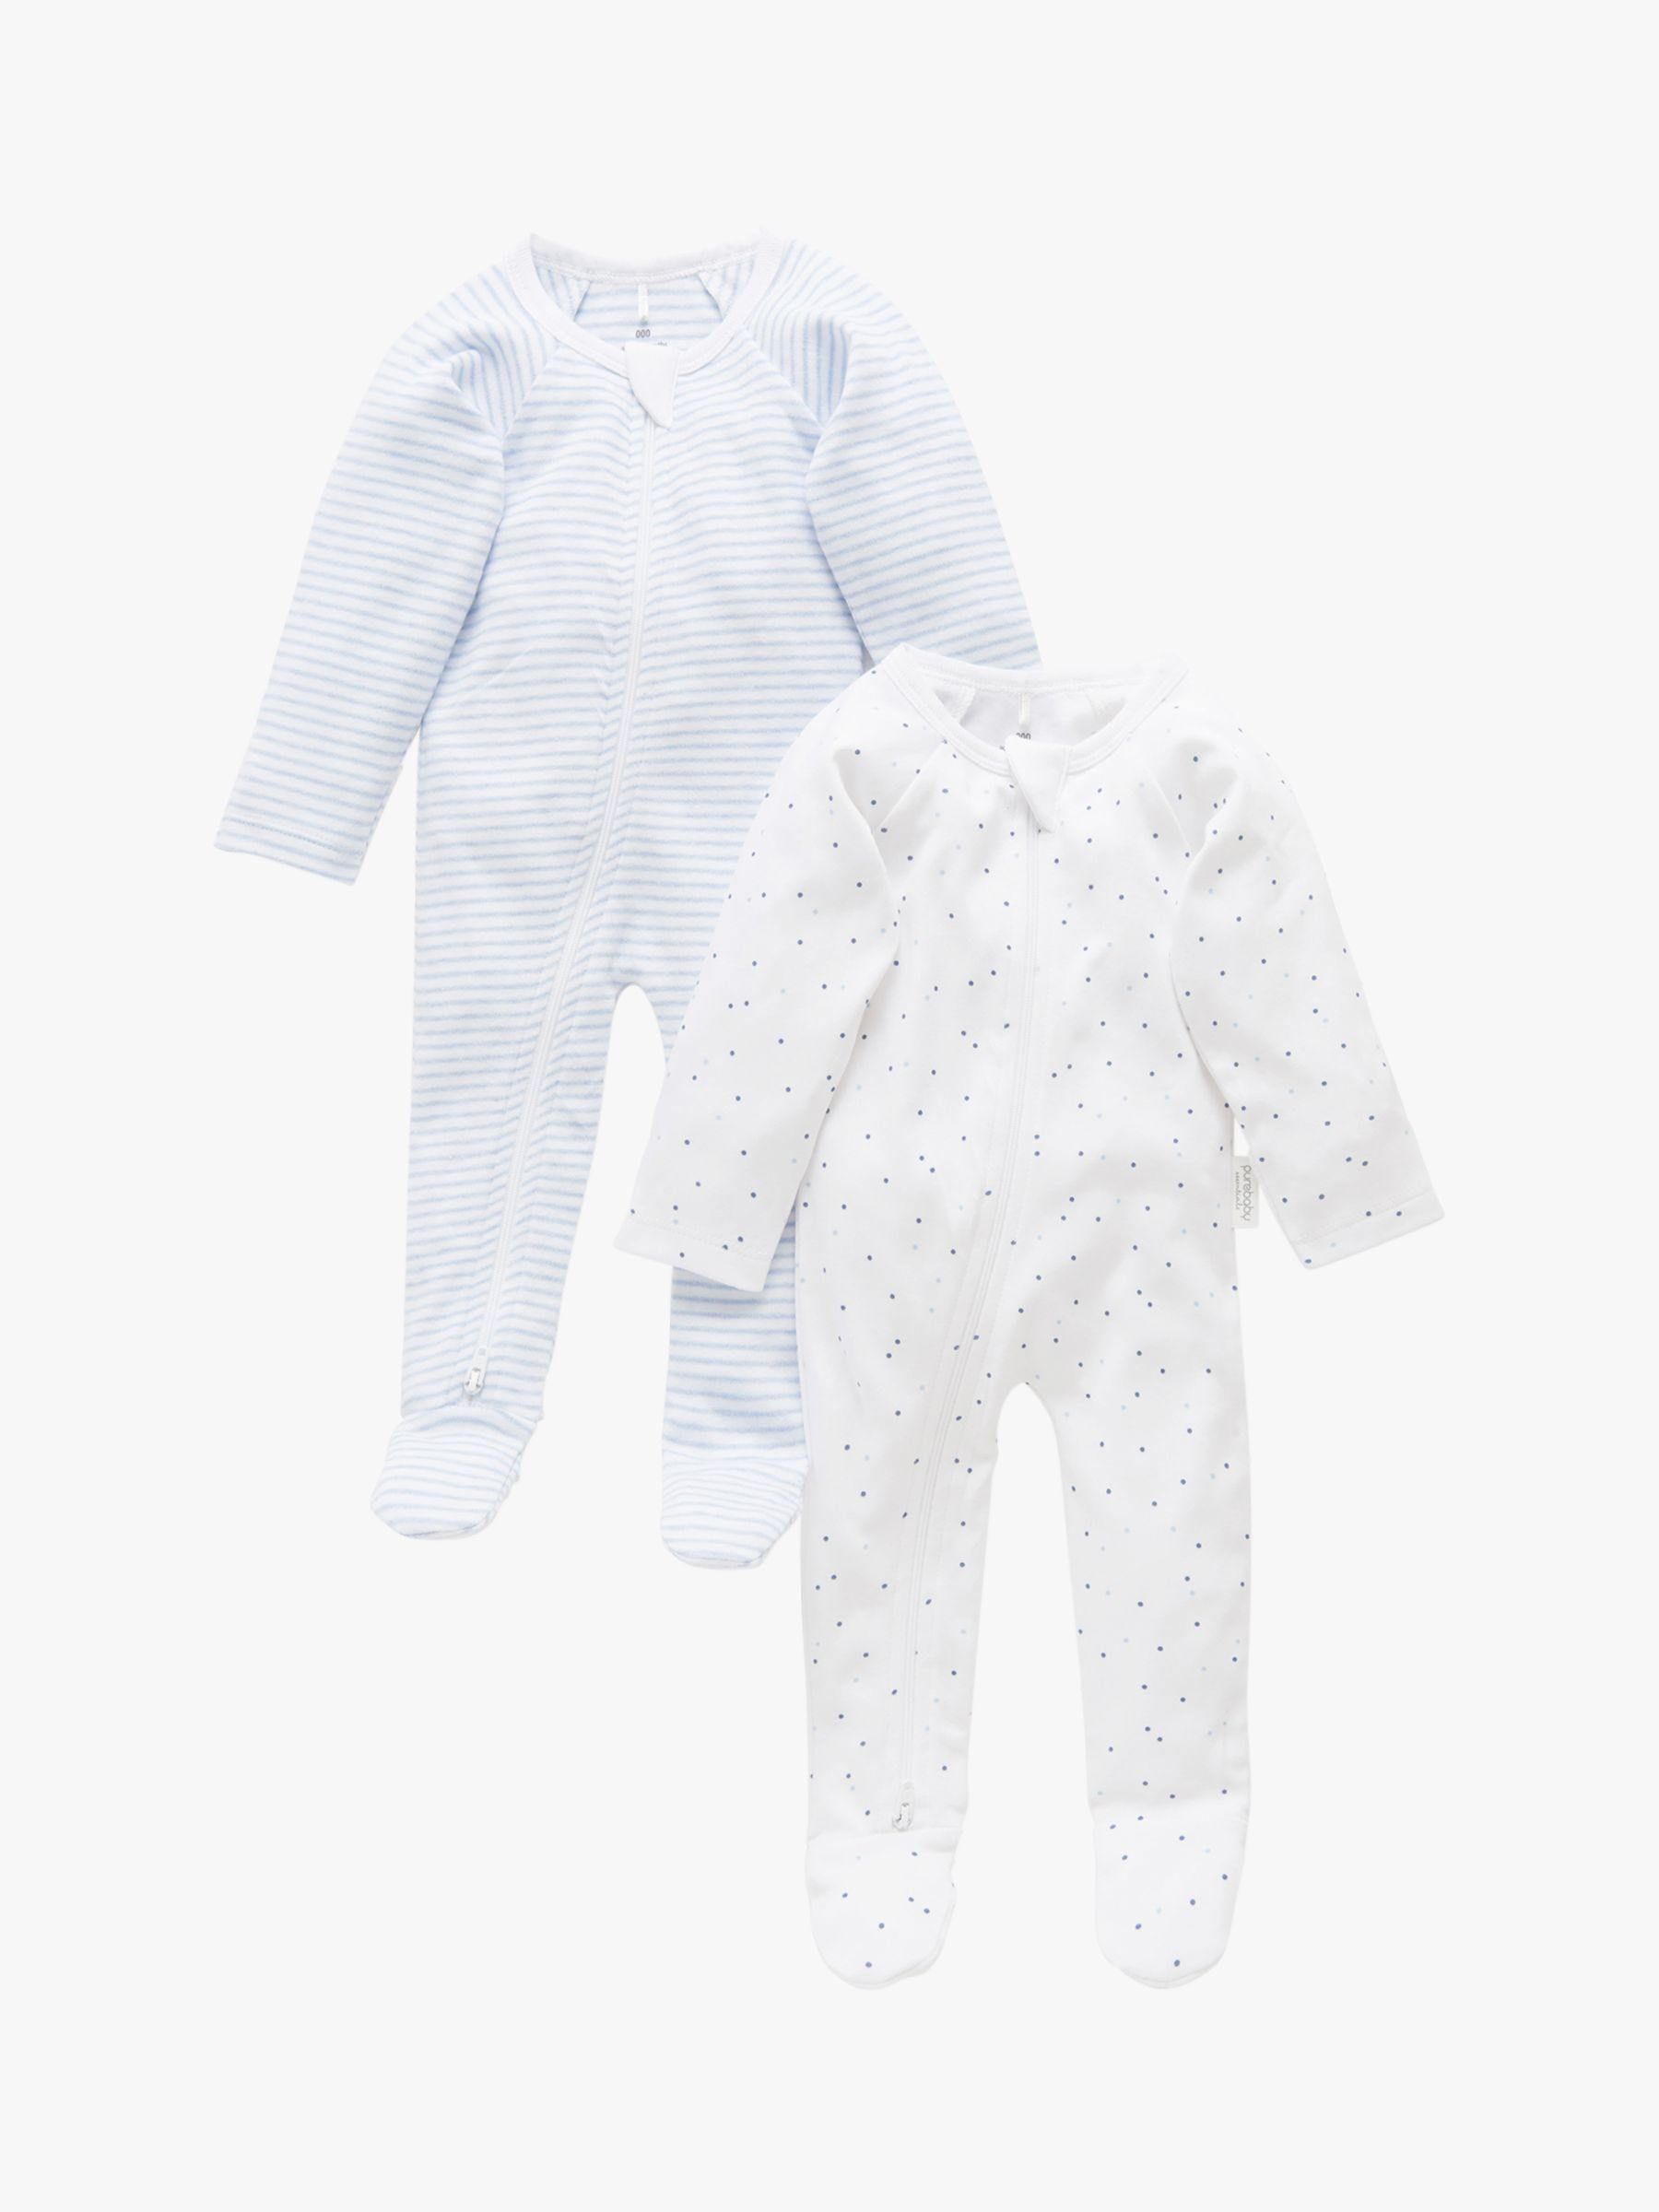 Purebaby Grow Suit, Pack of 2, Light Blue, Early Baby